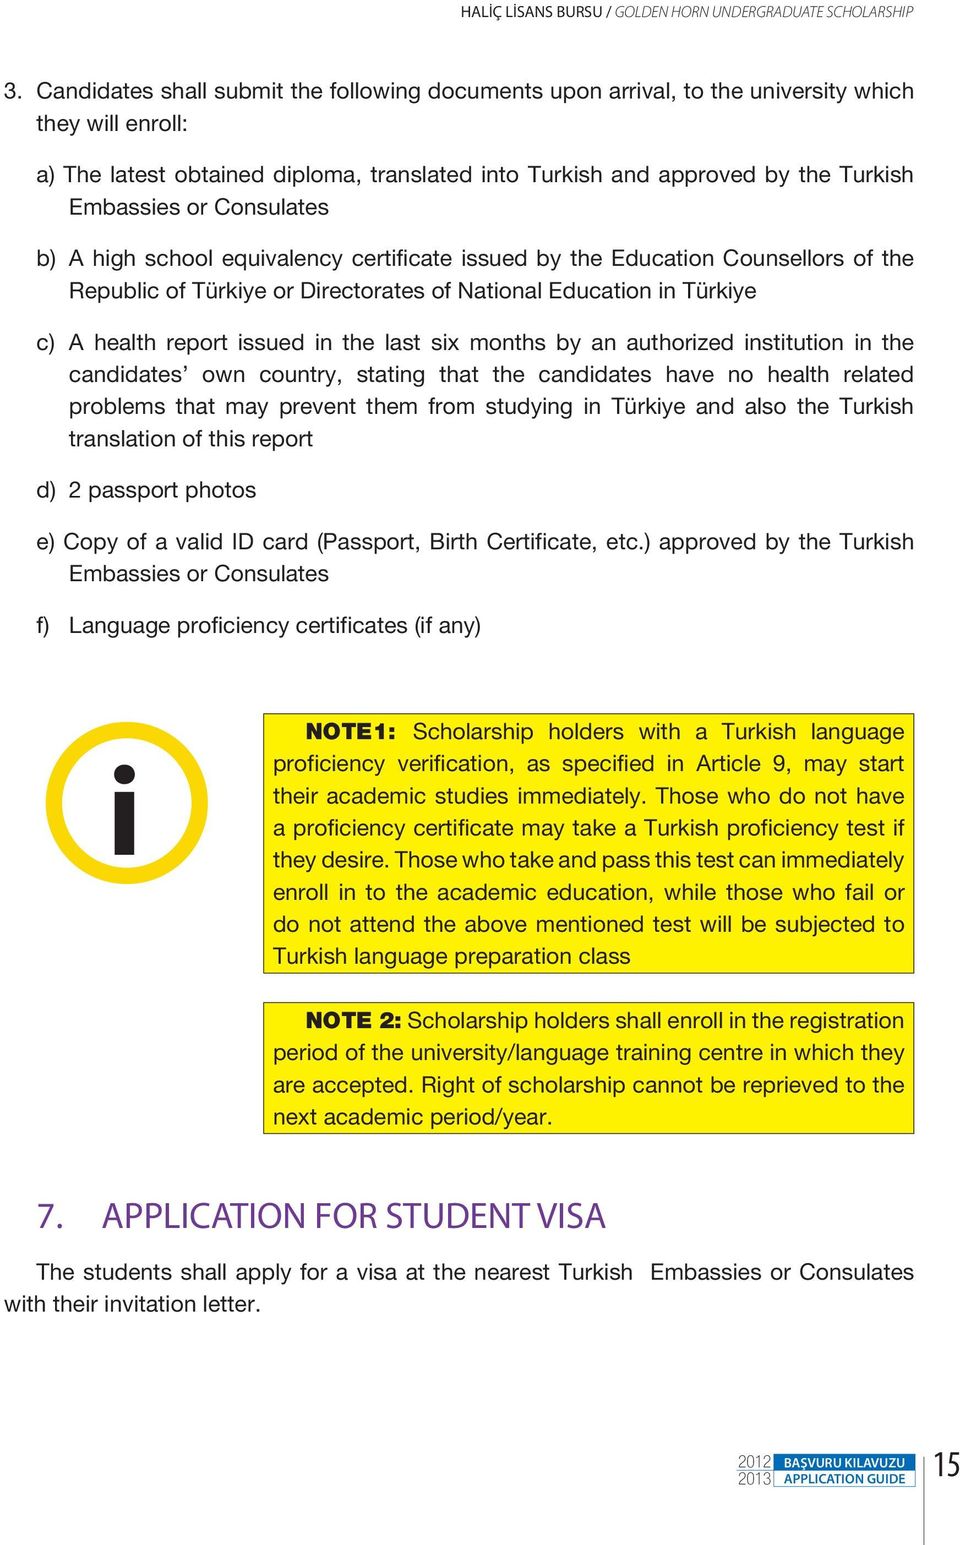 or Consulates b) A high school equivalency certificate issued by the Education Counsellors of the Republic of Türkiye or Directorates of National Education in Türkiye c) A health report issued in the